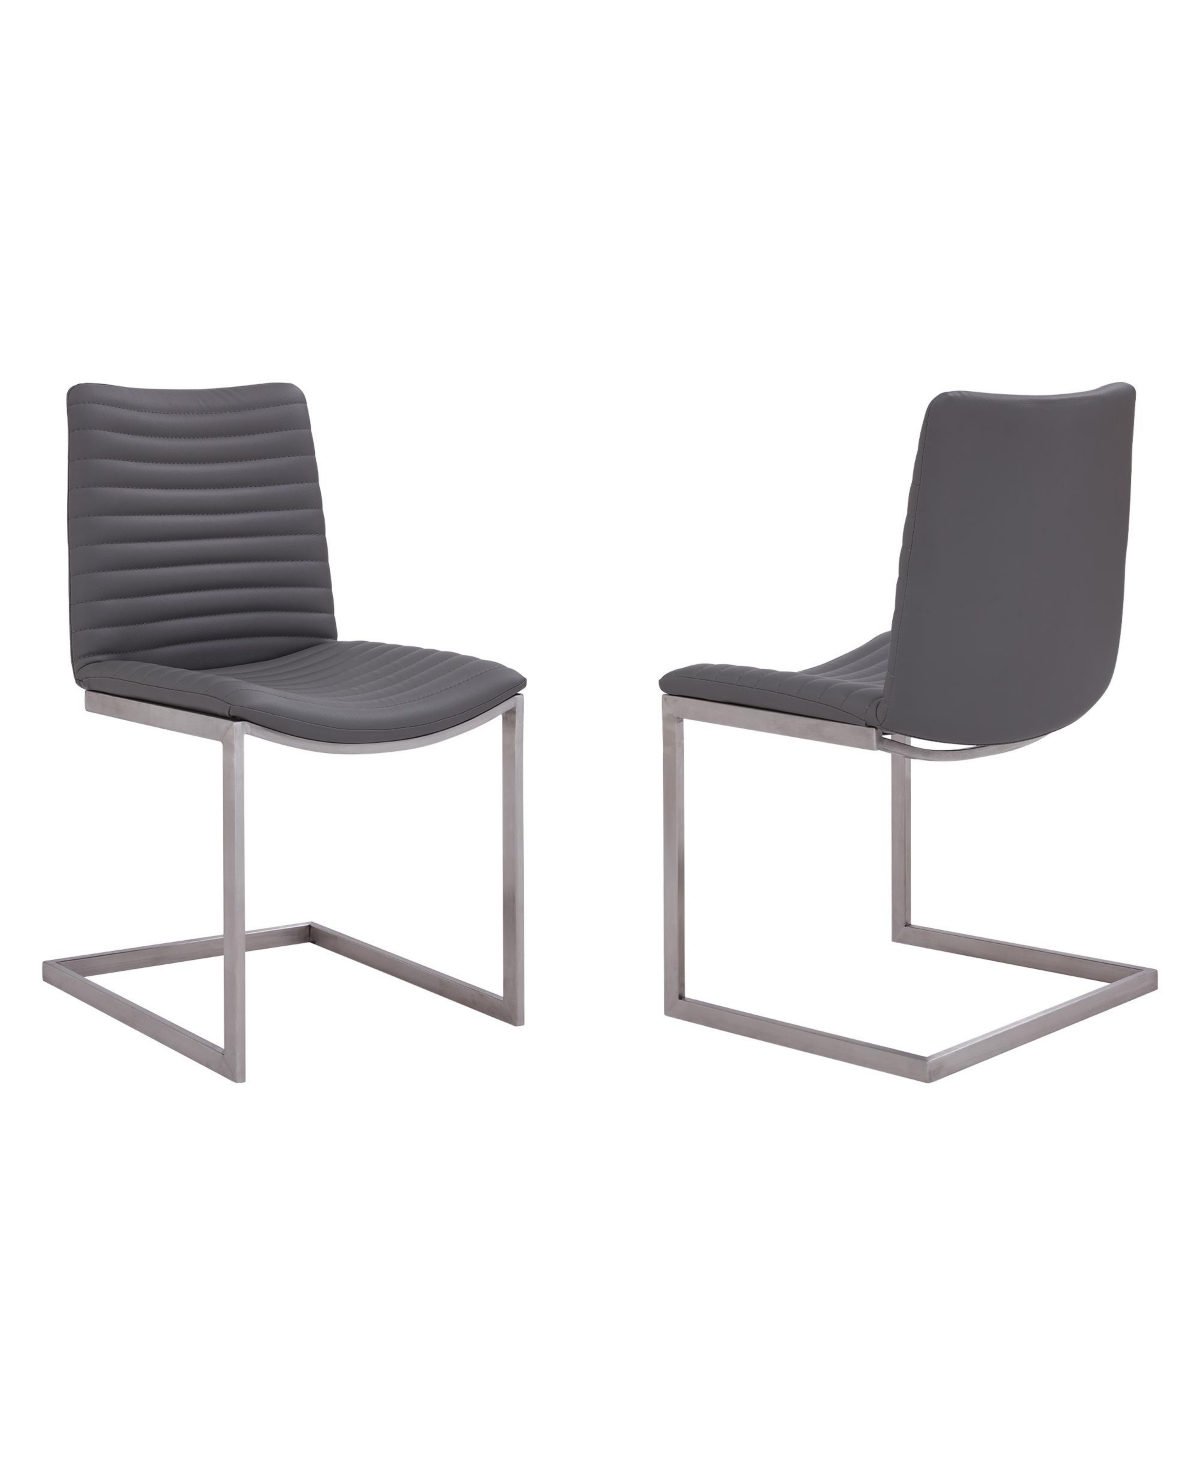 April Dining Chair, Set of 2